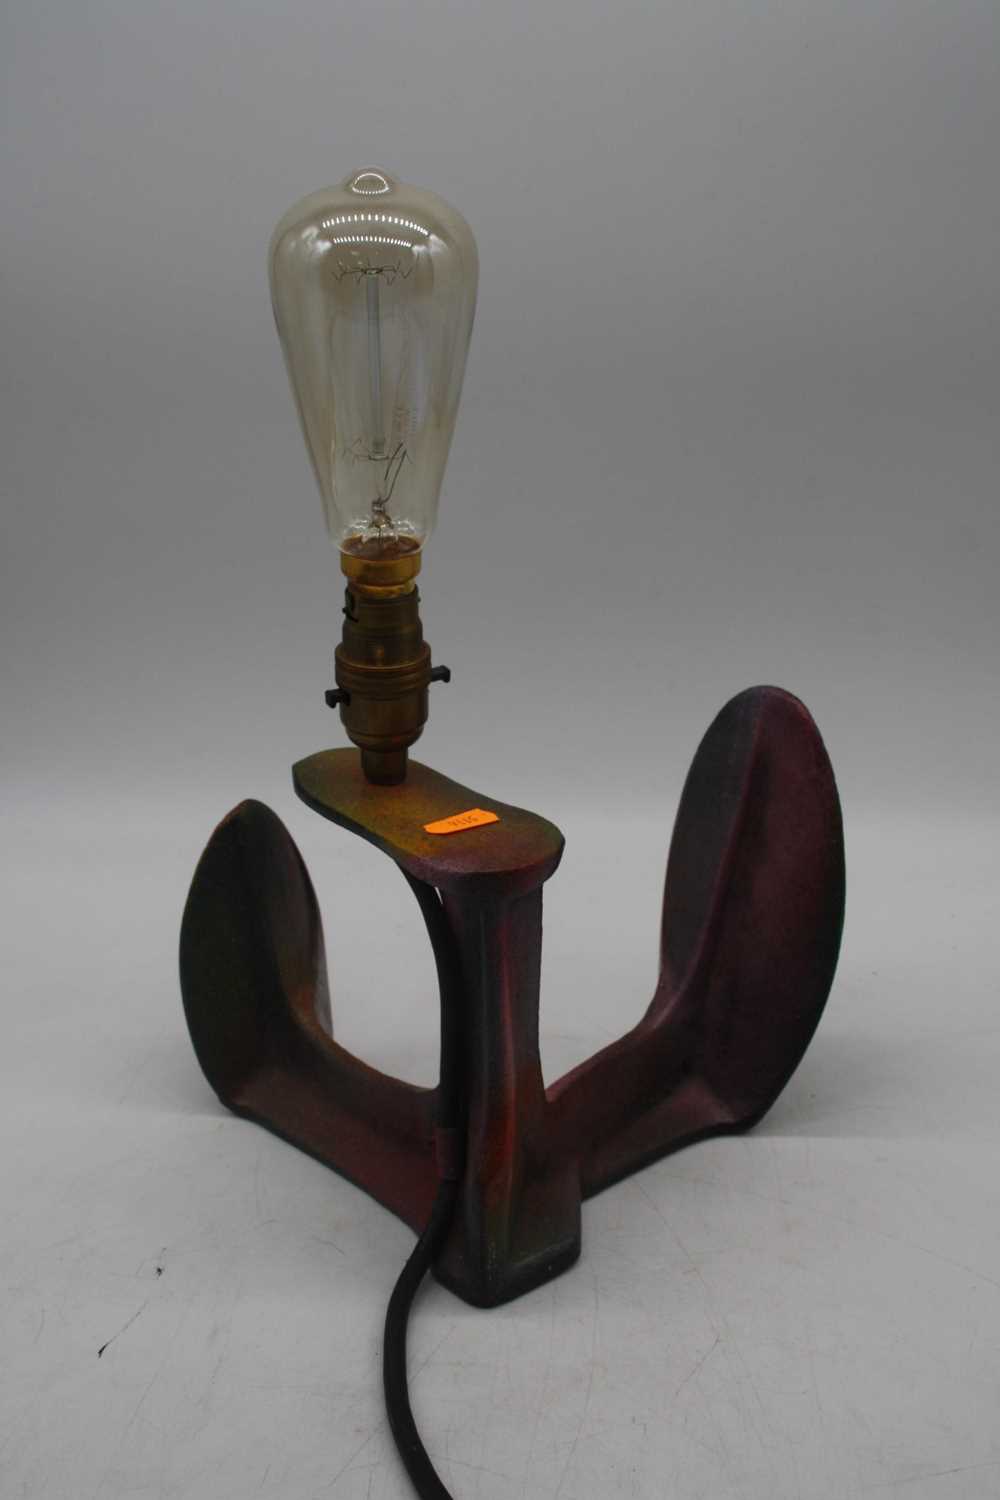 A cast iron shoe-last converted into a table lamp